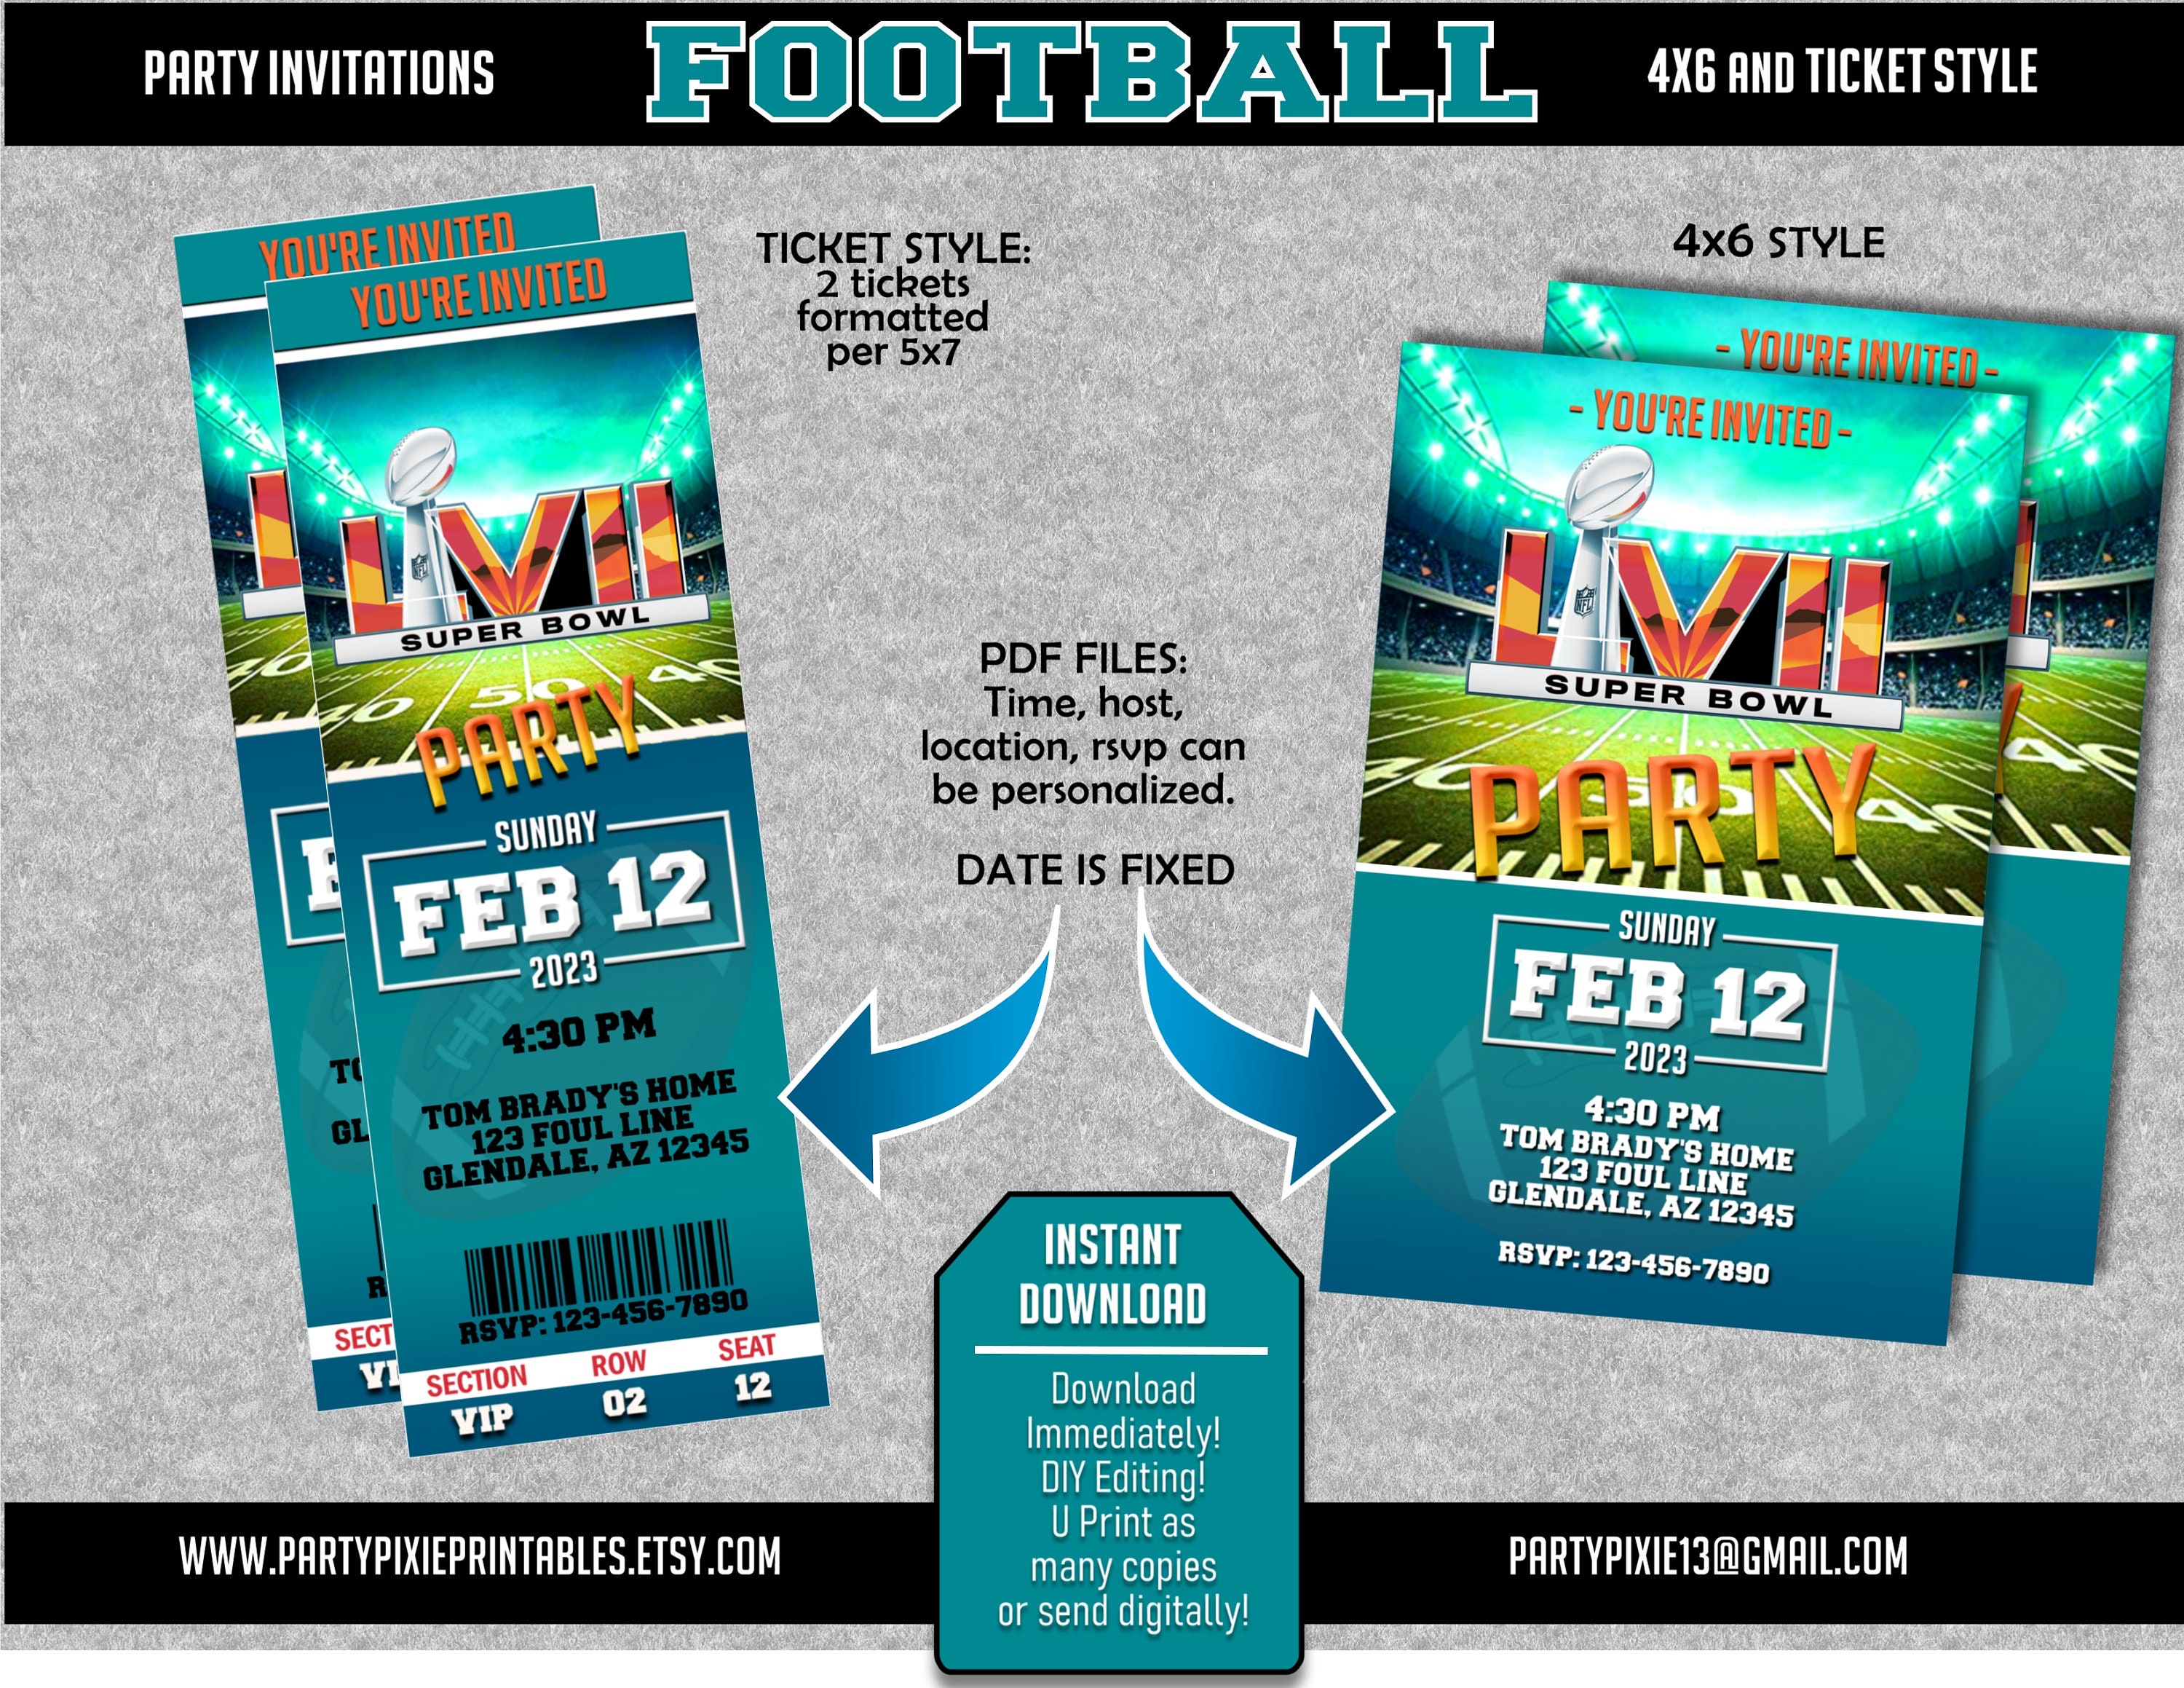 Ensure Super Bowl LI Tickets Are Authentic, Purchase 100% Verified Tickets  From Ticketmaster And The NFL Ticket Exchange